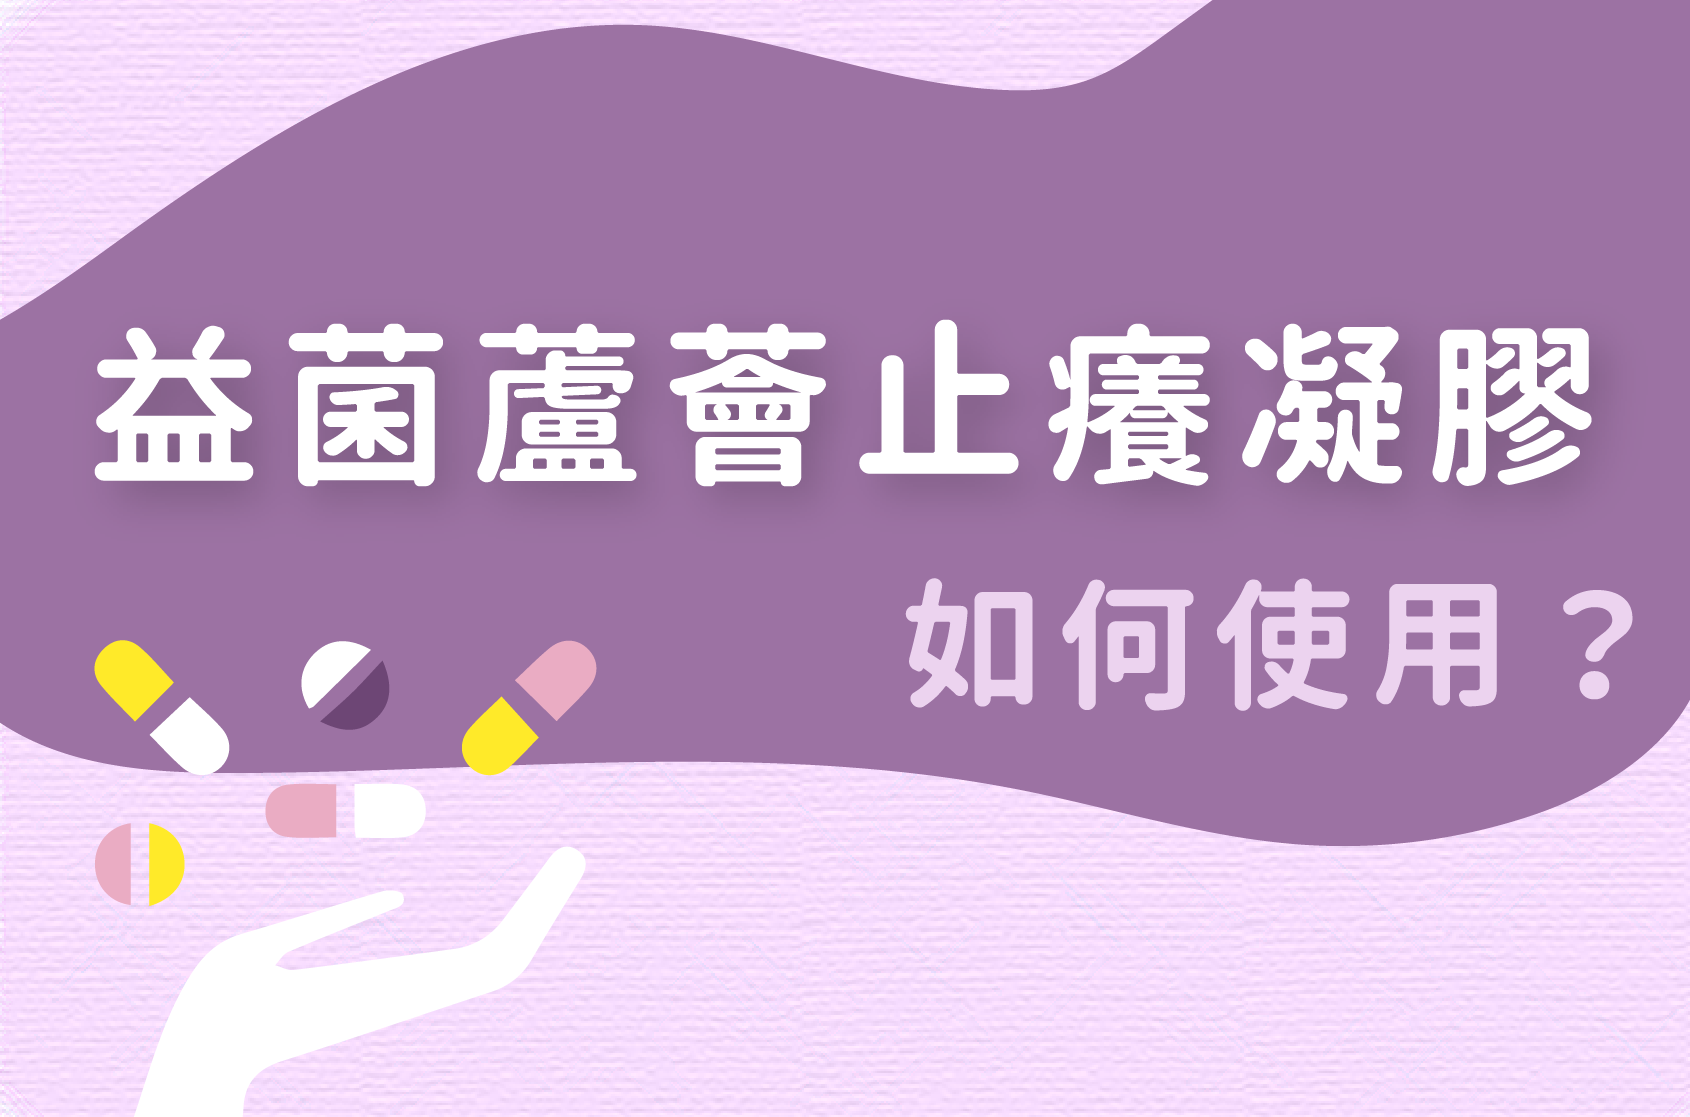 Read more about the article 保健品｜益菌蘆薈止癢凝膠如何使用？